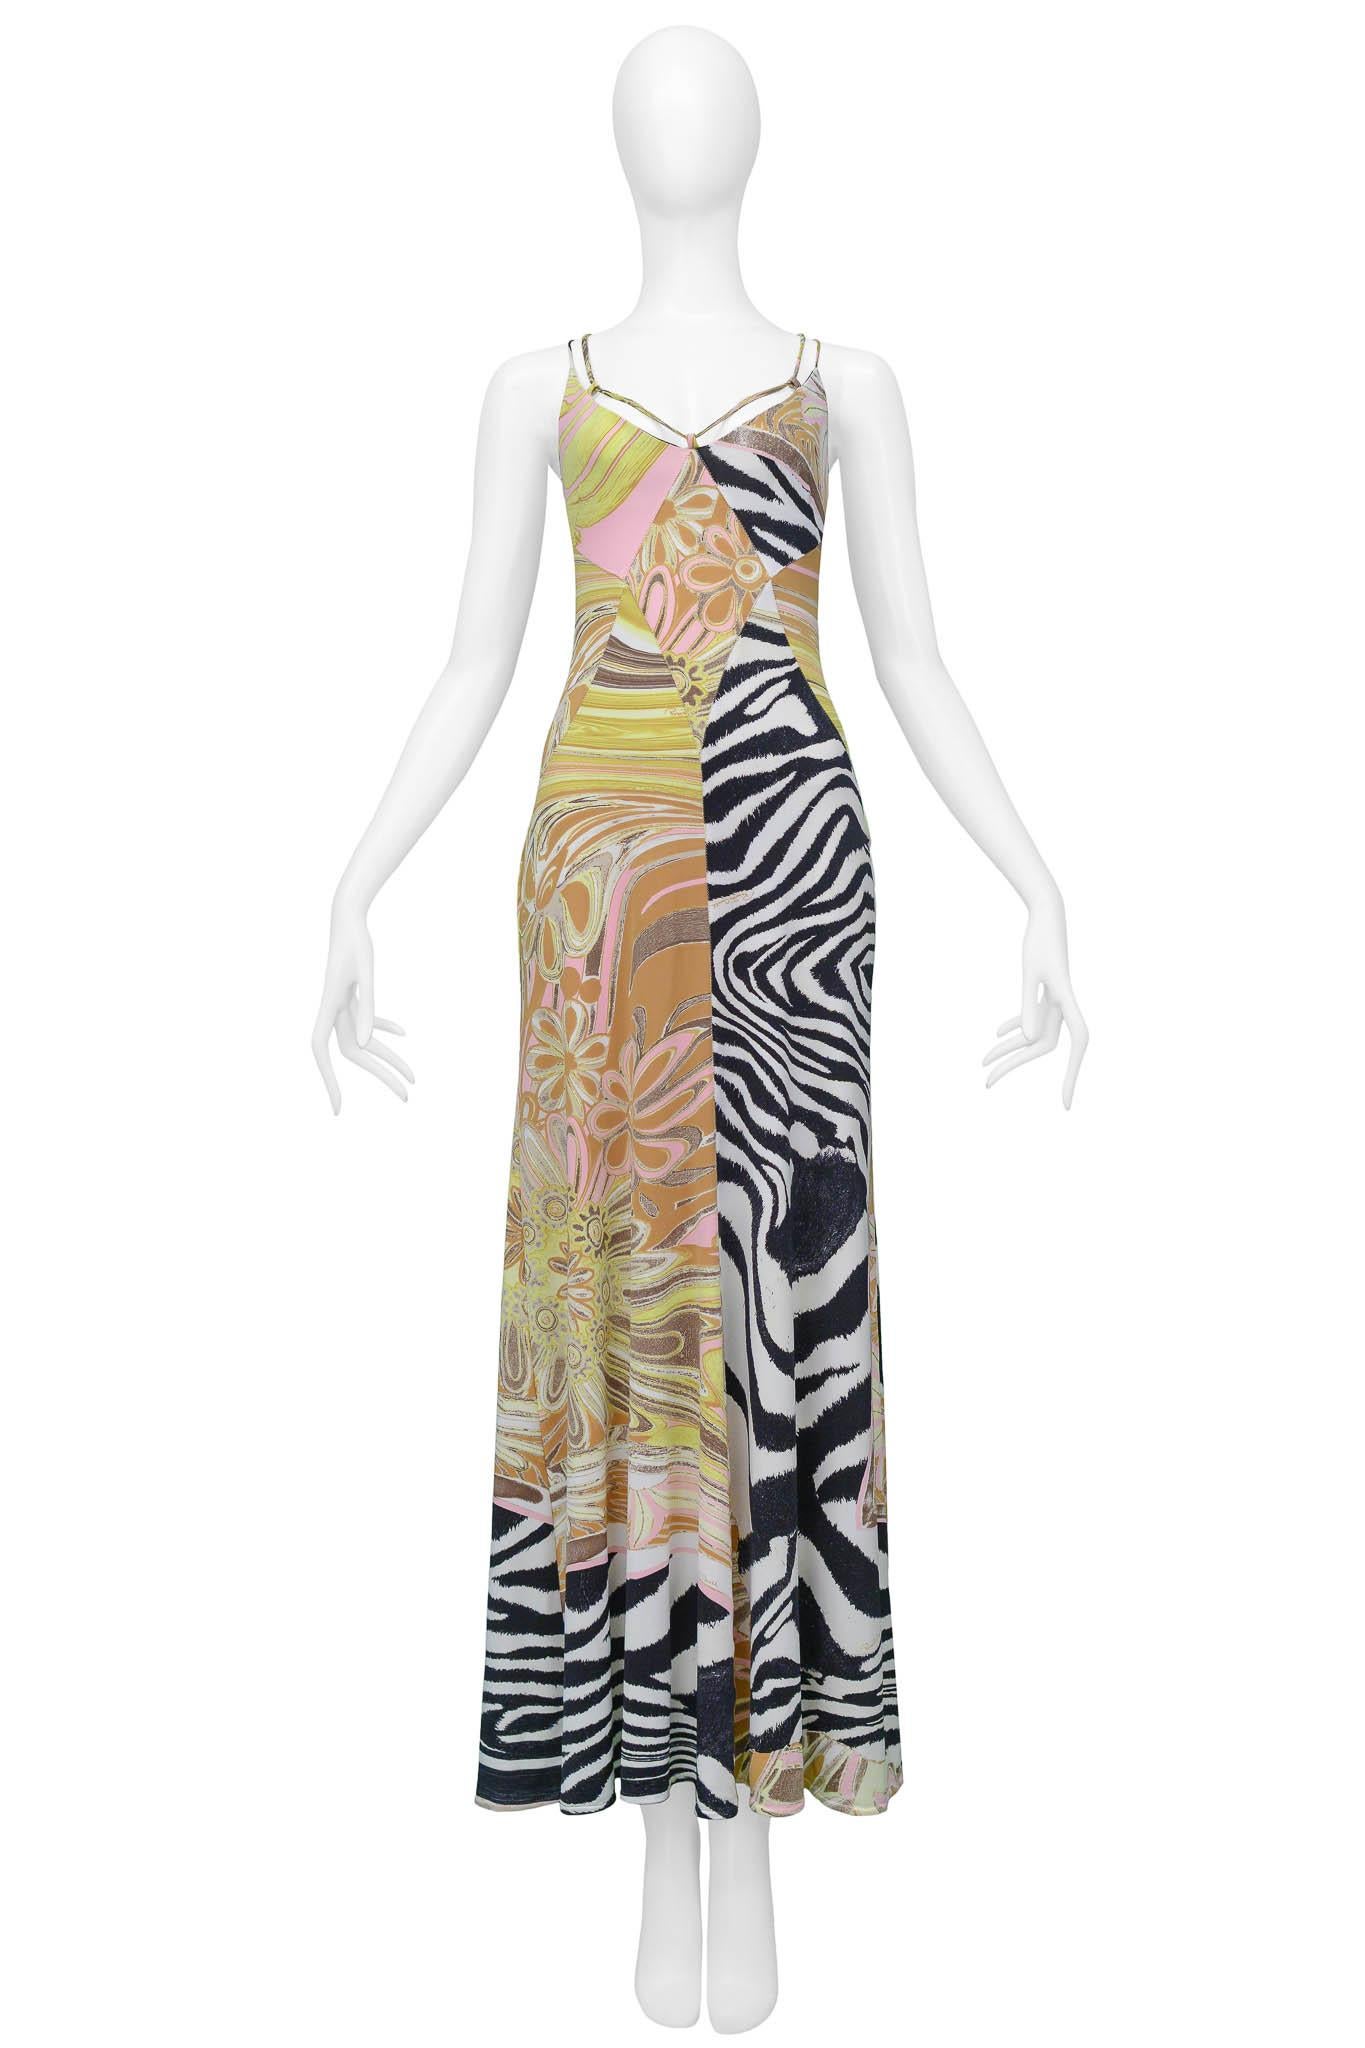 Resurrection Vintage is excited to present a vintage Roberto Cavalli multi-color dress featuring a combination of floral and zebra print, and a lace-up back.

Roberto Cavalli
Size: Medium
Lycra
Excellent Vintage Condition 
Authenticity Guaranteed 